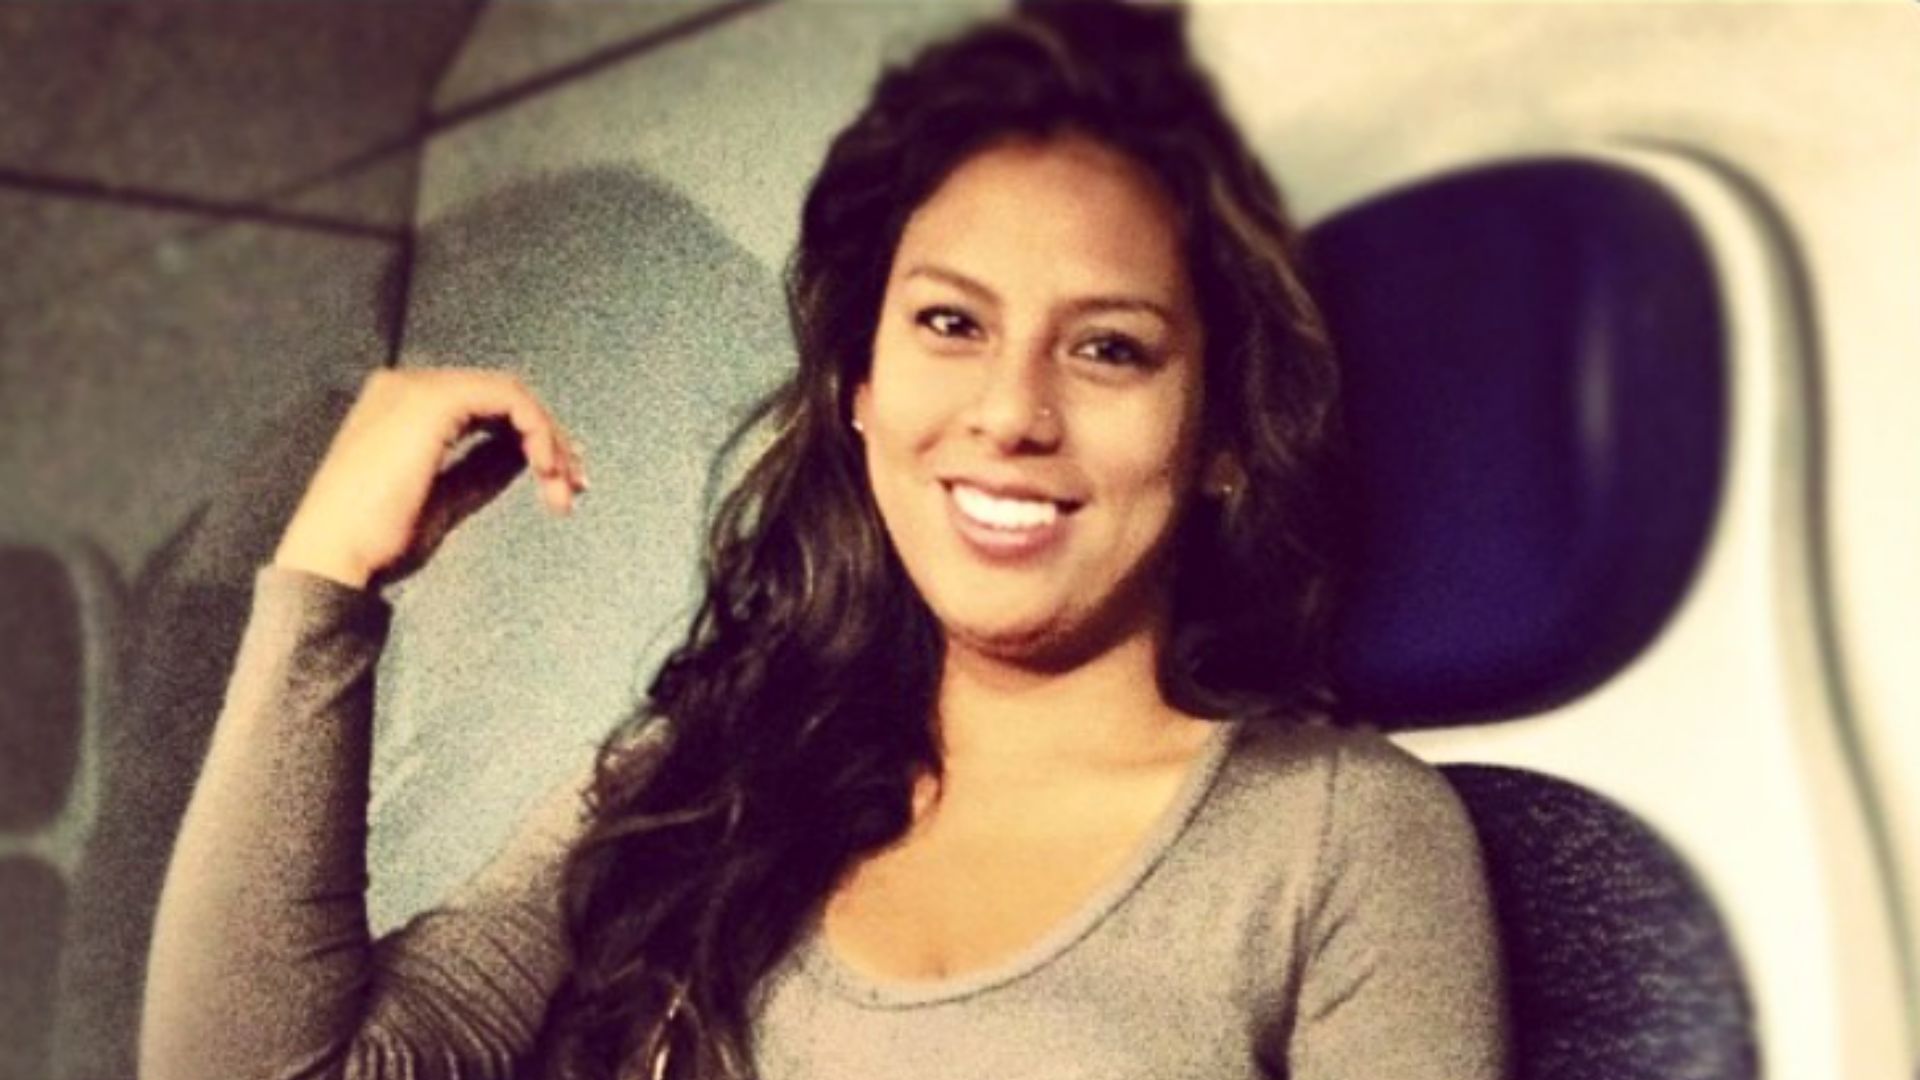 Rosa Fuentes announced her separation from Paolo Hurtado after the first ampay that the footballer starred in.